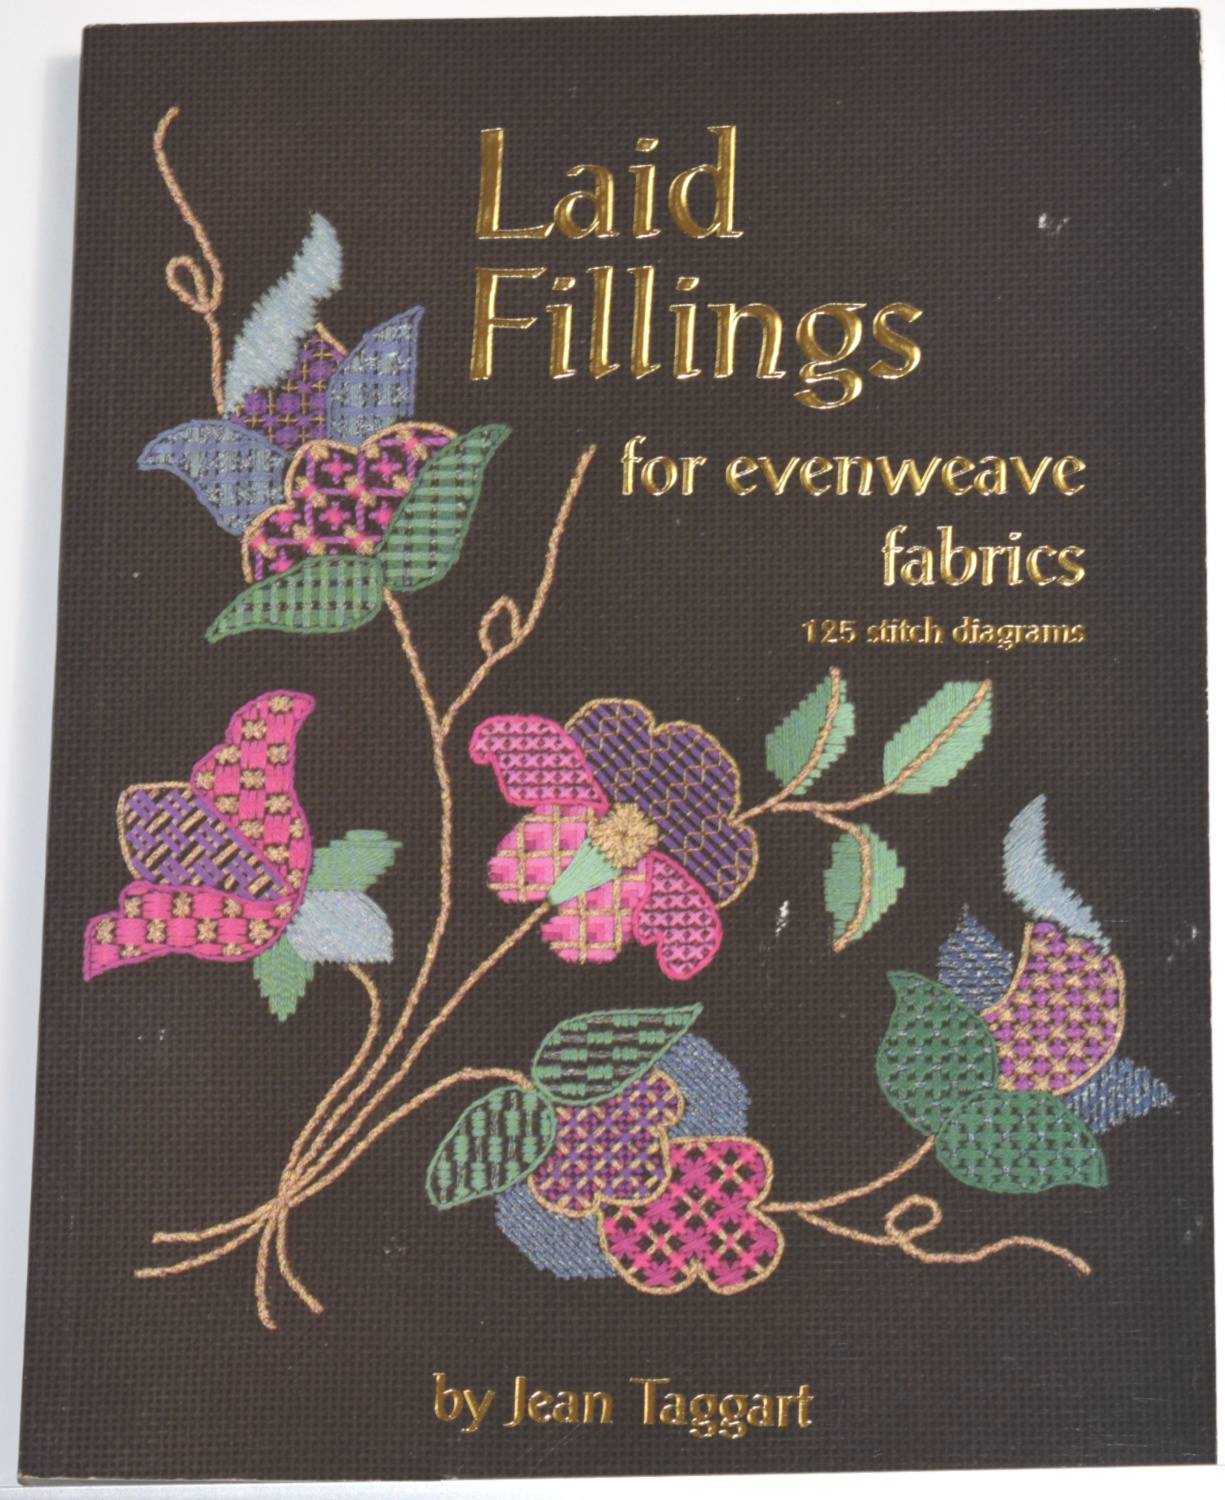 Laid Fillings for Evenweave Fabrics by Jean Taggert